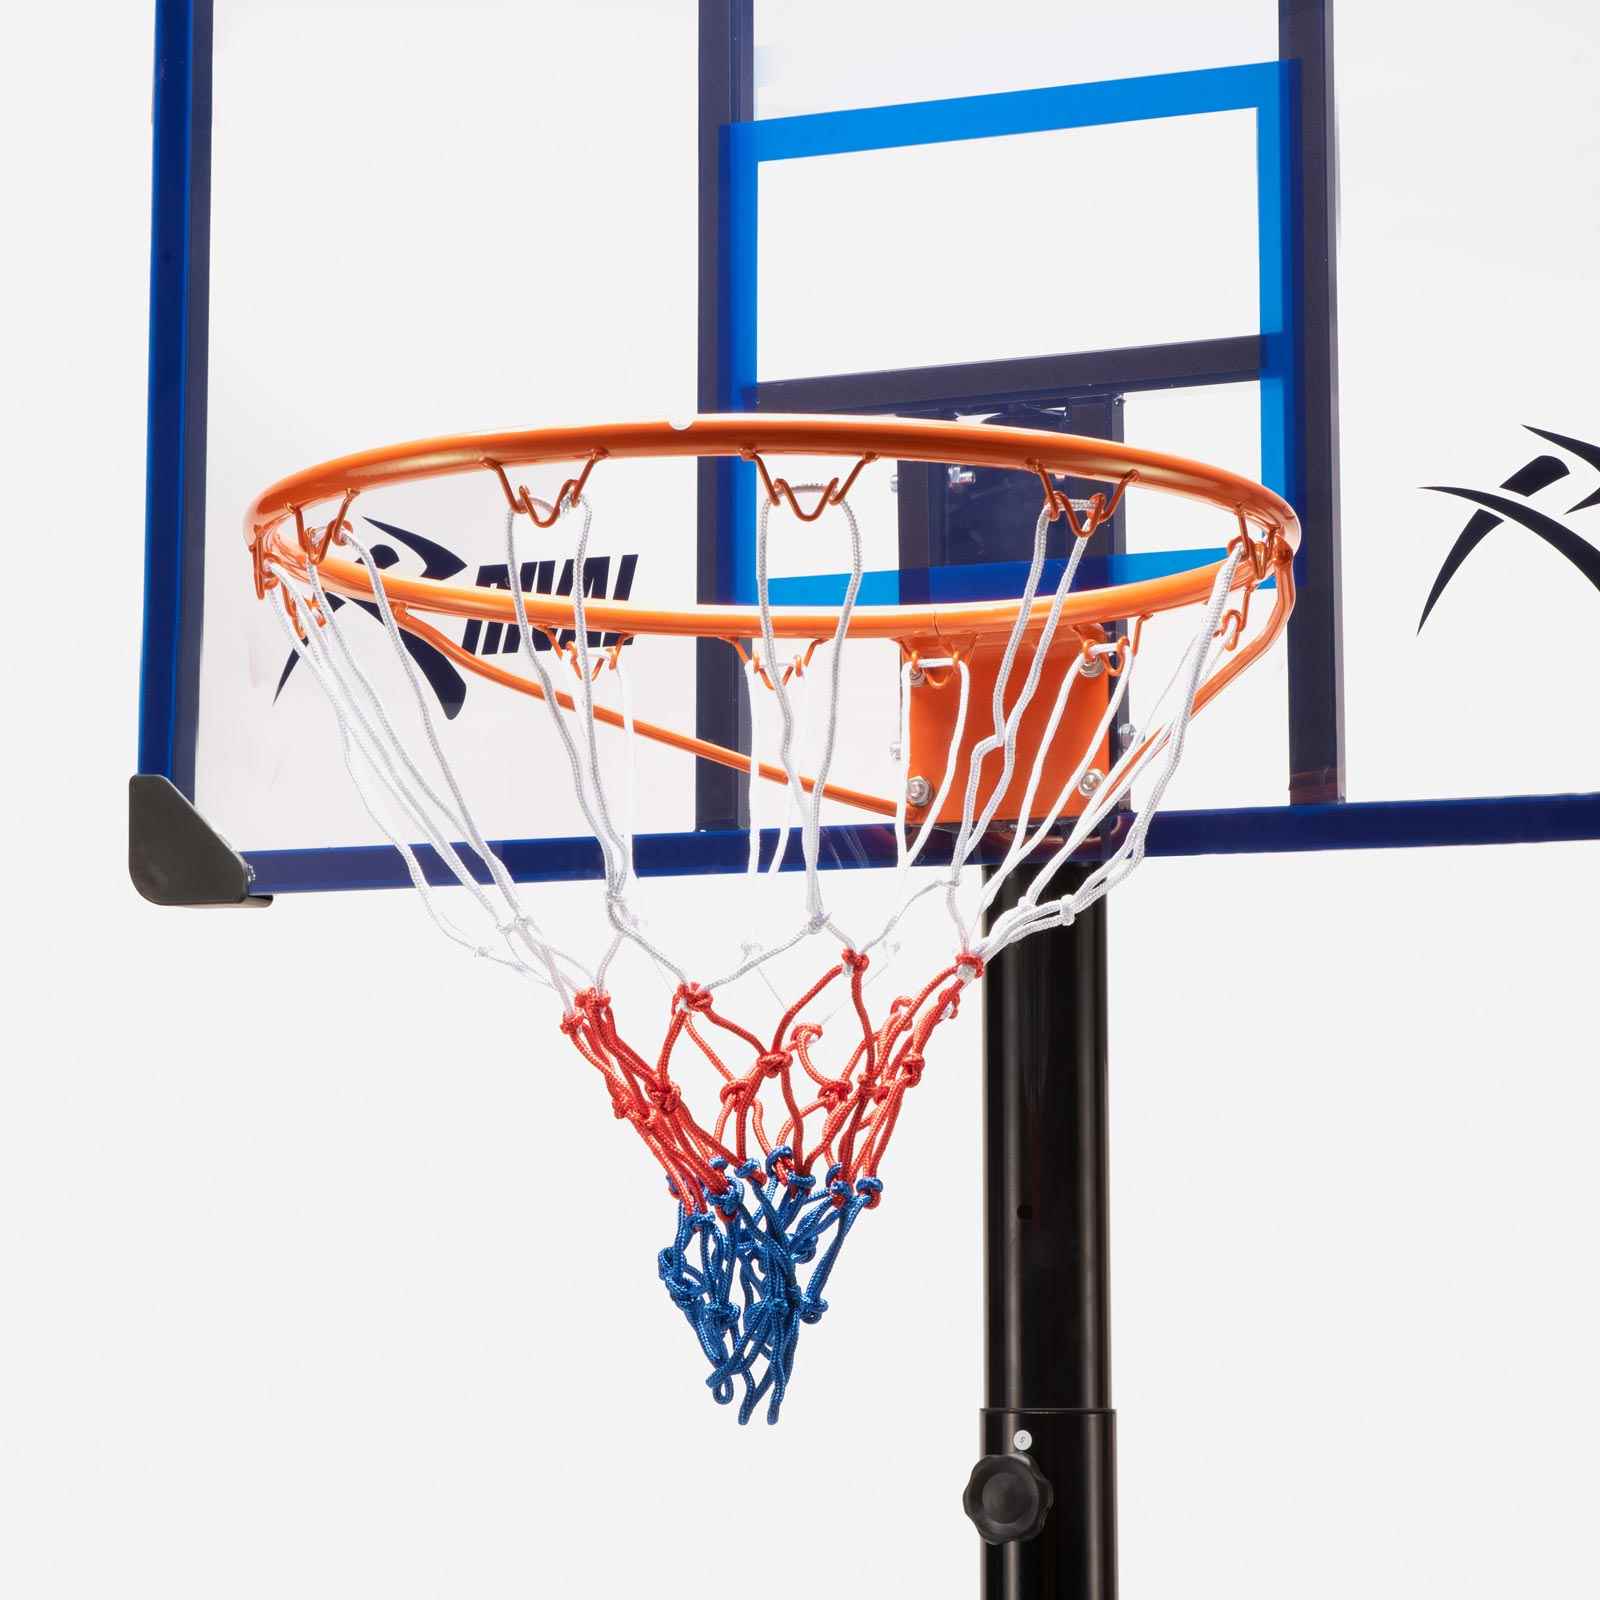 RIVAL DETROIT BASKETBALL HOOP & STAND SYSTEM